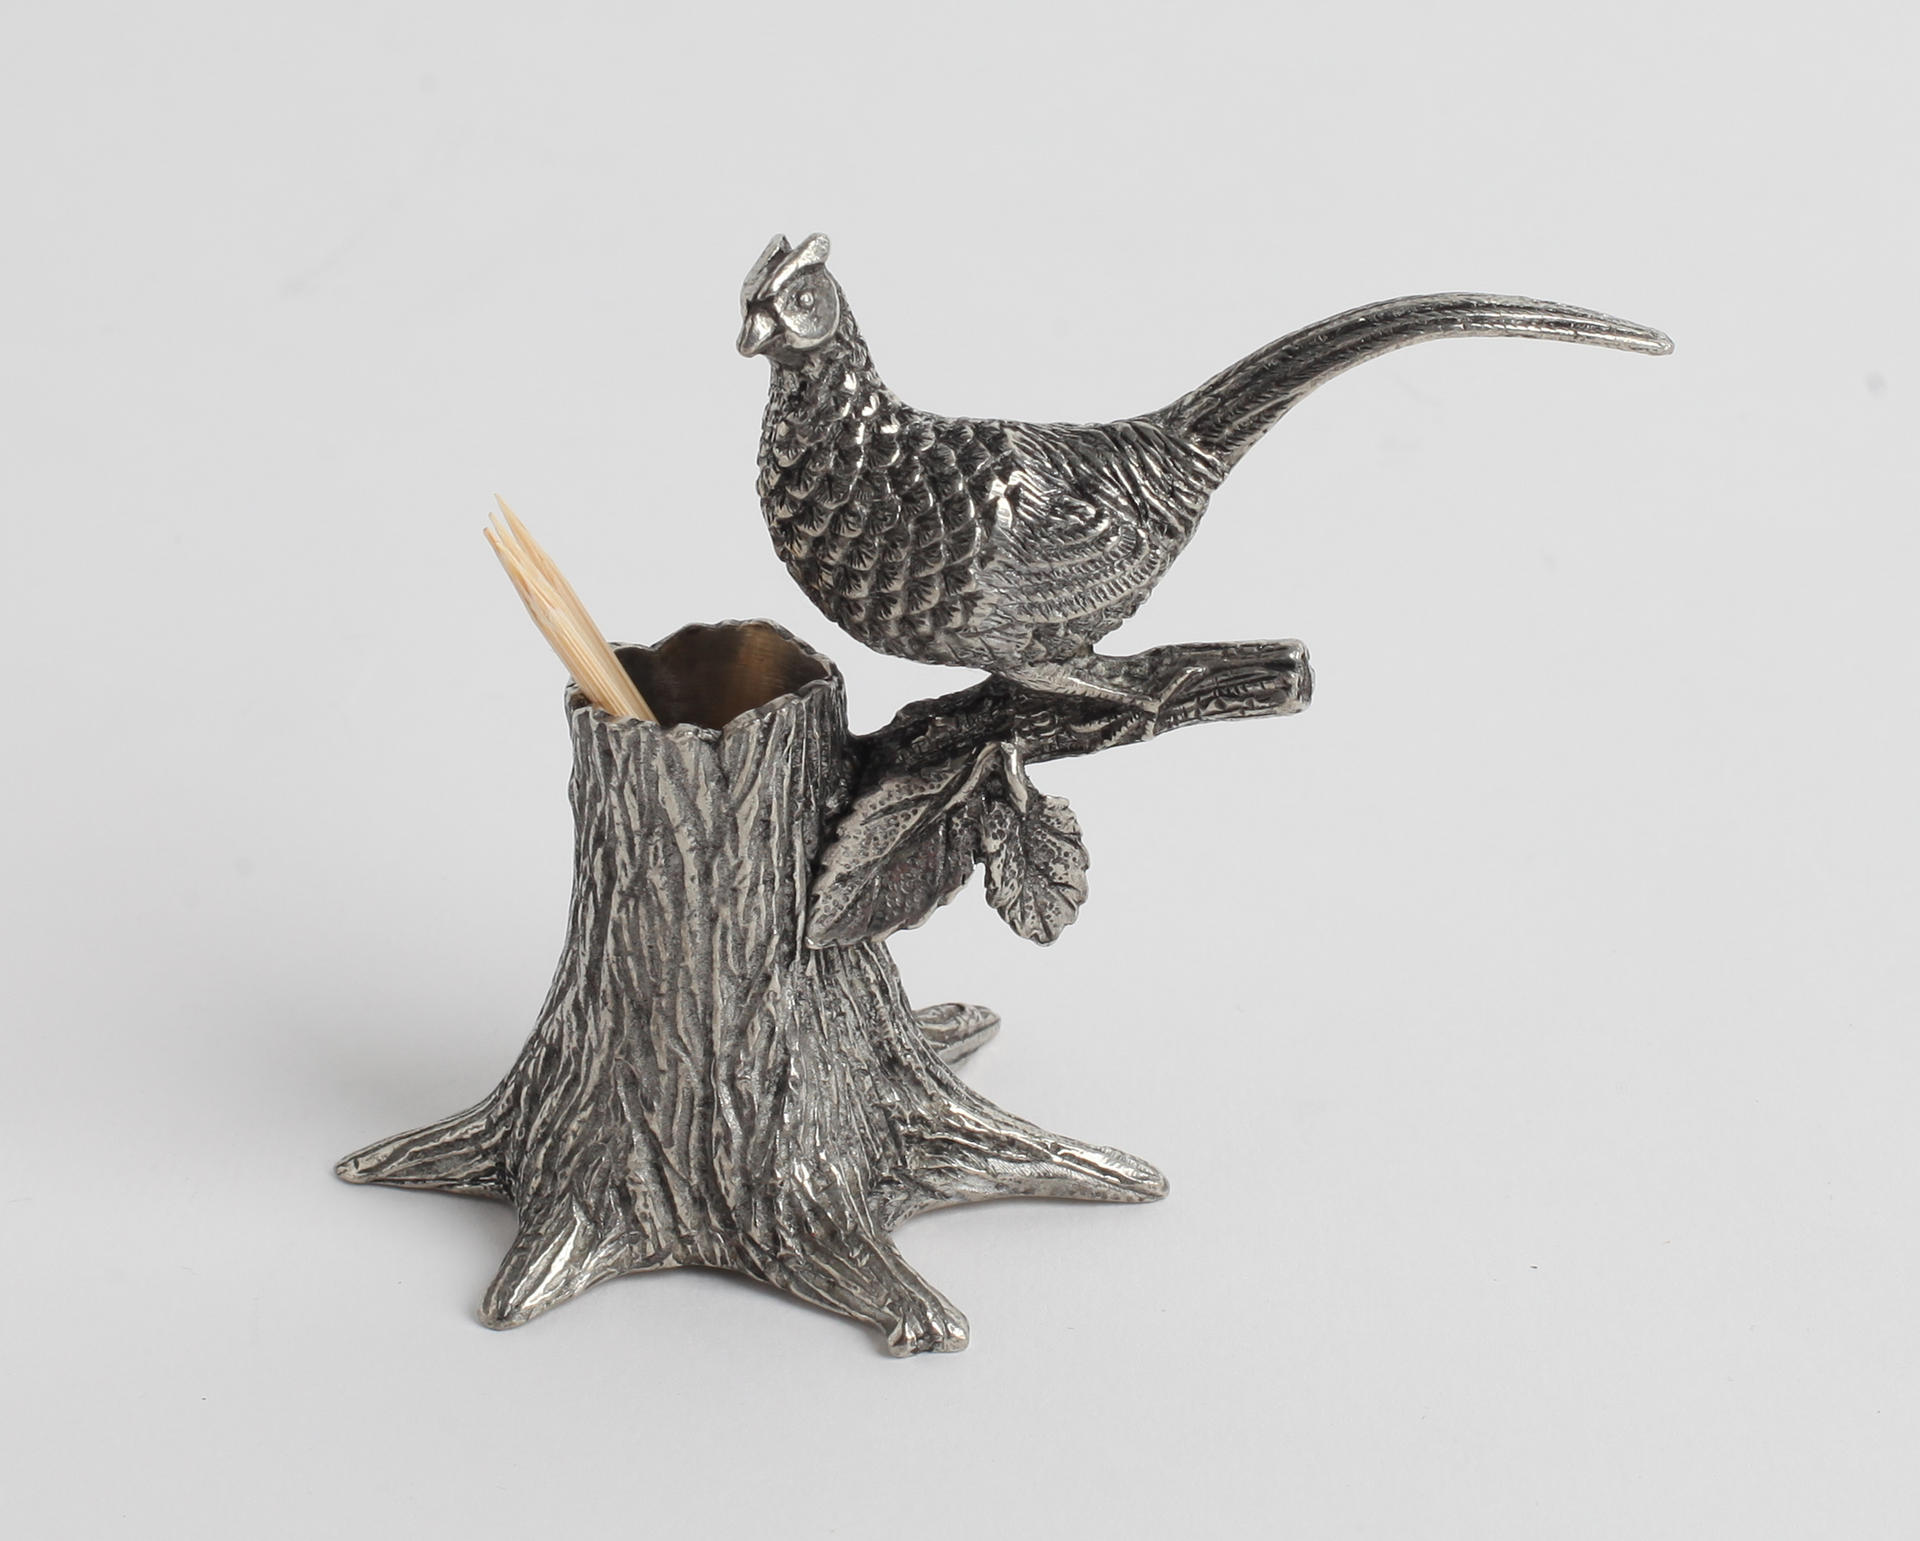 Pheasant toothpick holder, HK$585, from Townhouse, Prince's Building, Central, tel: 2845 0633.